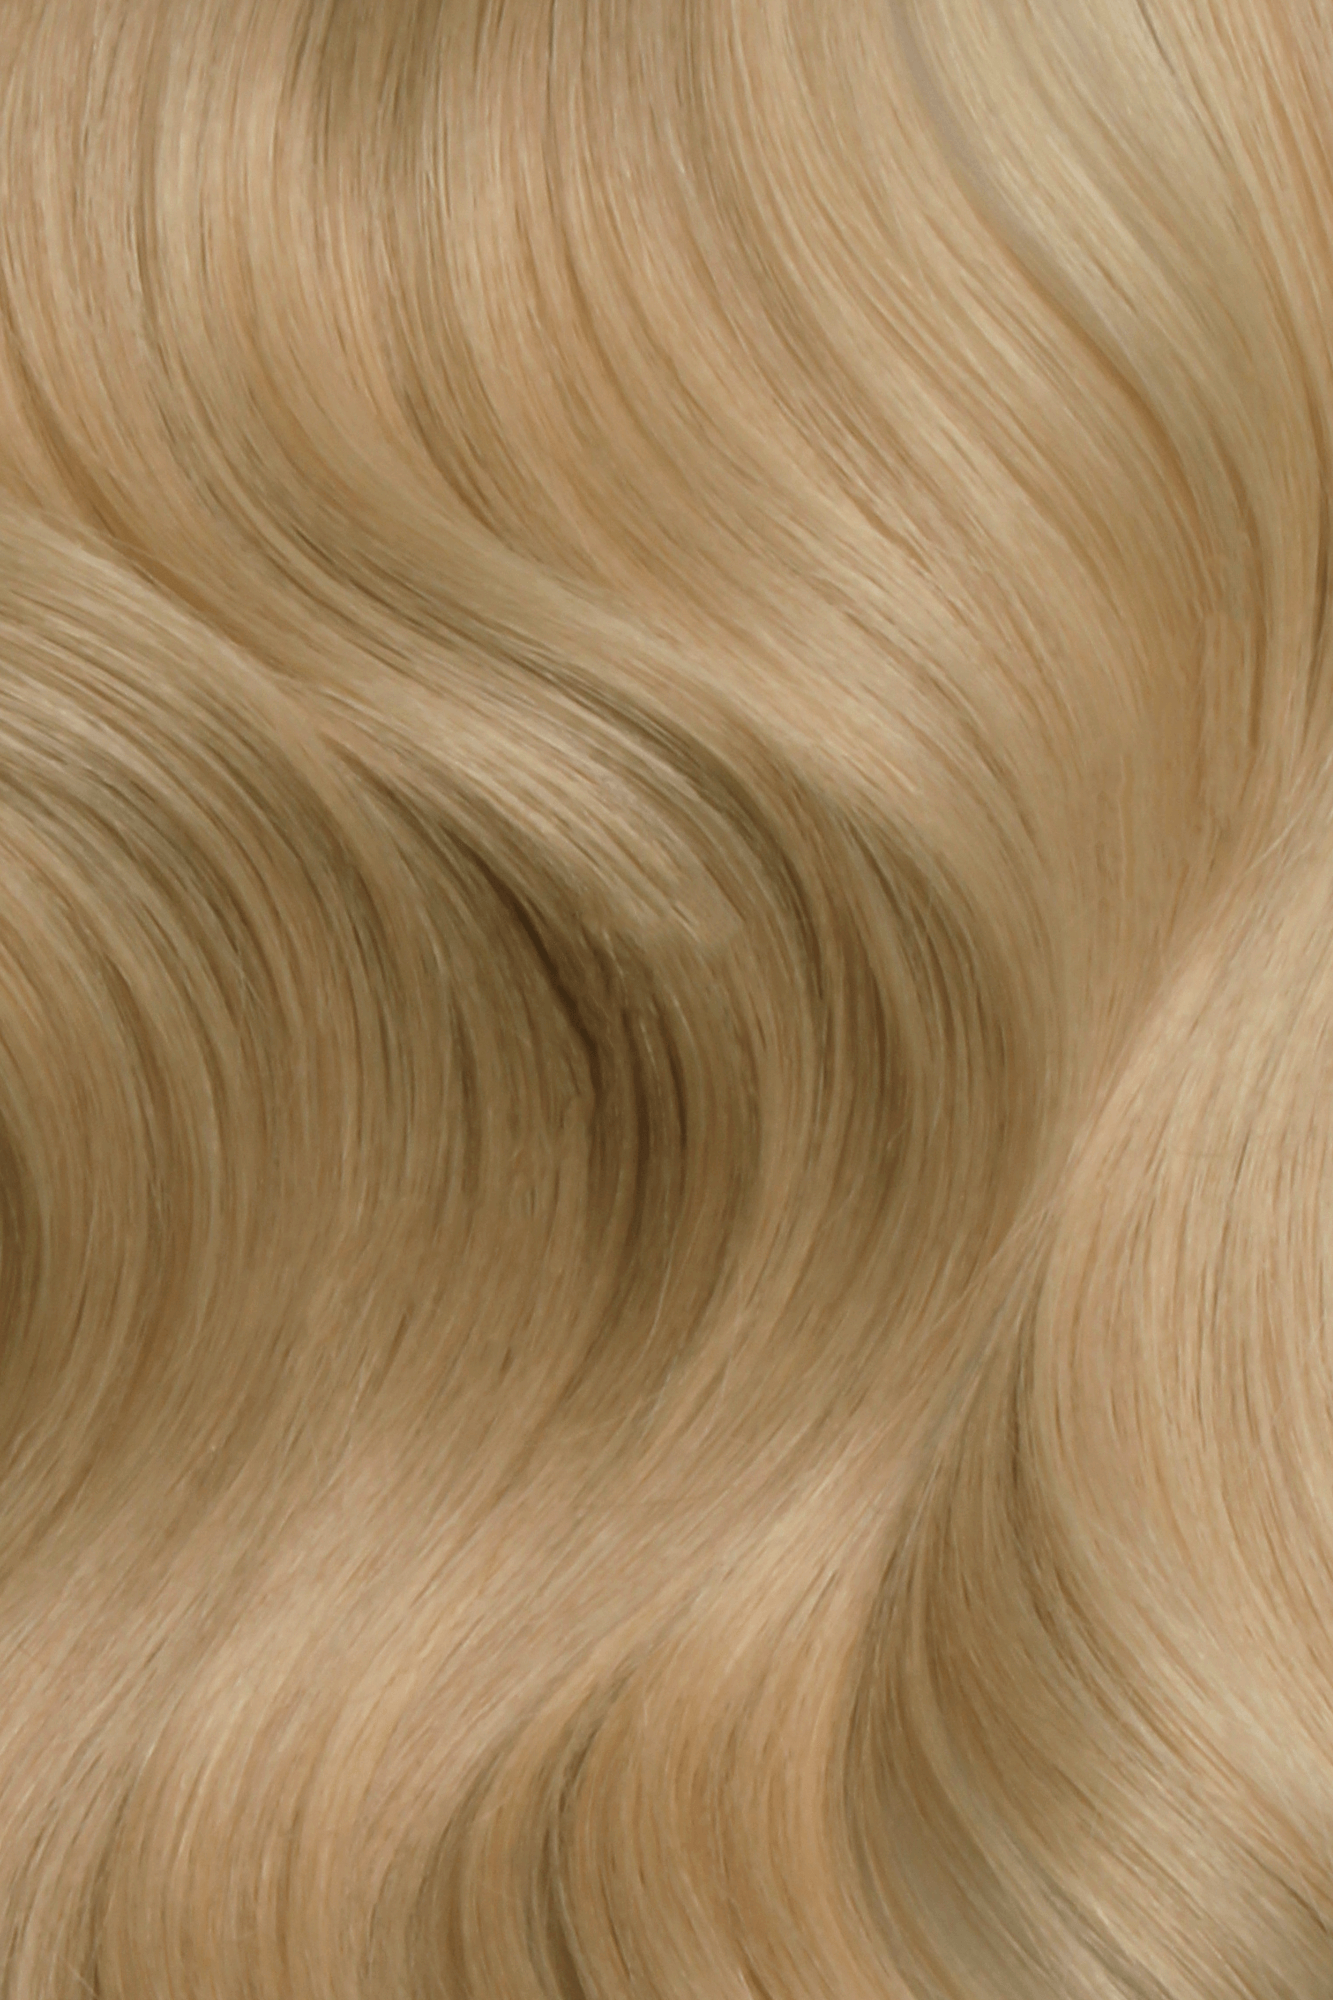 SEAMLESS® Tapes 16 Inches - SWAY Hair Extensions Beach-Blonde-18-22 clip-in hair extensions made of 100% Double Drawn, Remy Human Hair. SWAY SEAMLESS® Tapes, 16 inches. Lightweight, flexible, and perfect for any hairstyle.